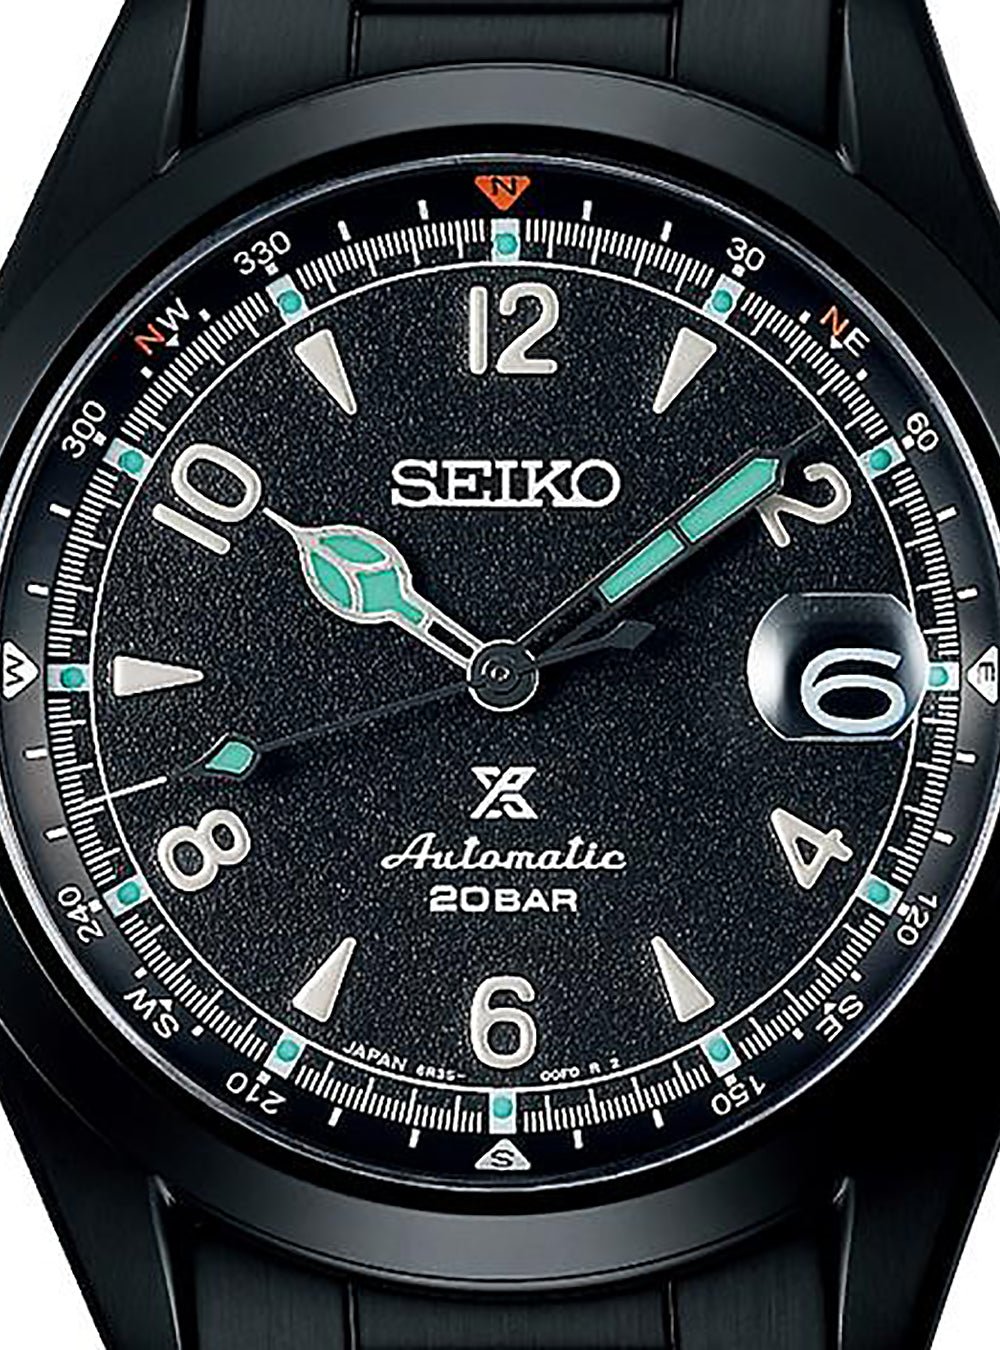 SEIKO PROSPEX ALPINIST THE BLACK SERIES LIMITED EDITION SBDC185 MADE IN  JAPAN JDM